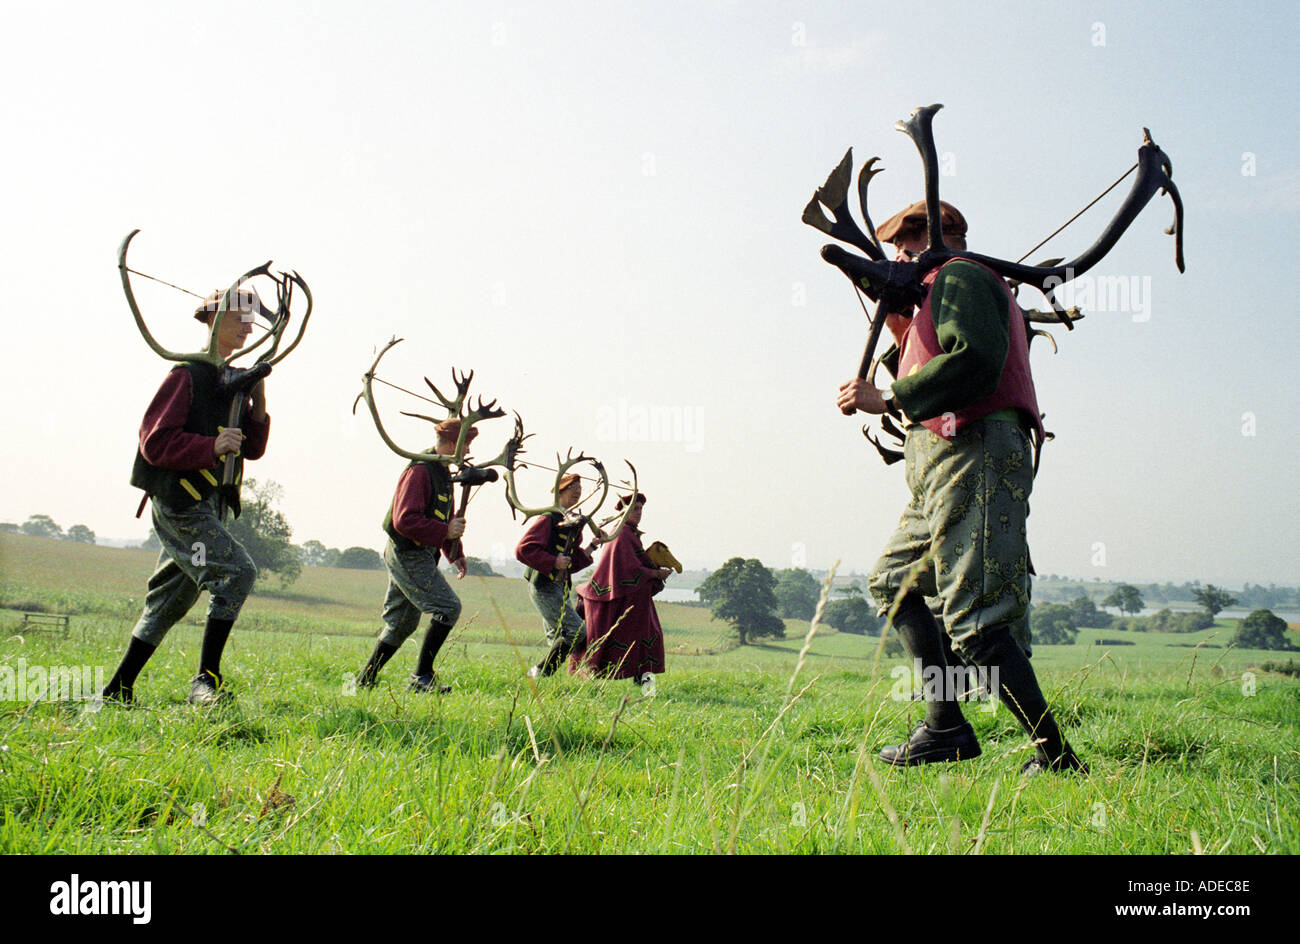 The Horn Dance in Abbots Bromley Staffordshire UK takes place every September. Stock Photo